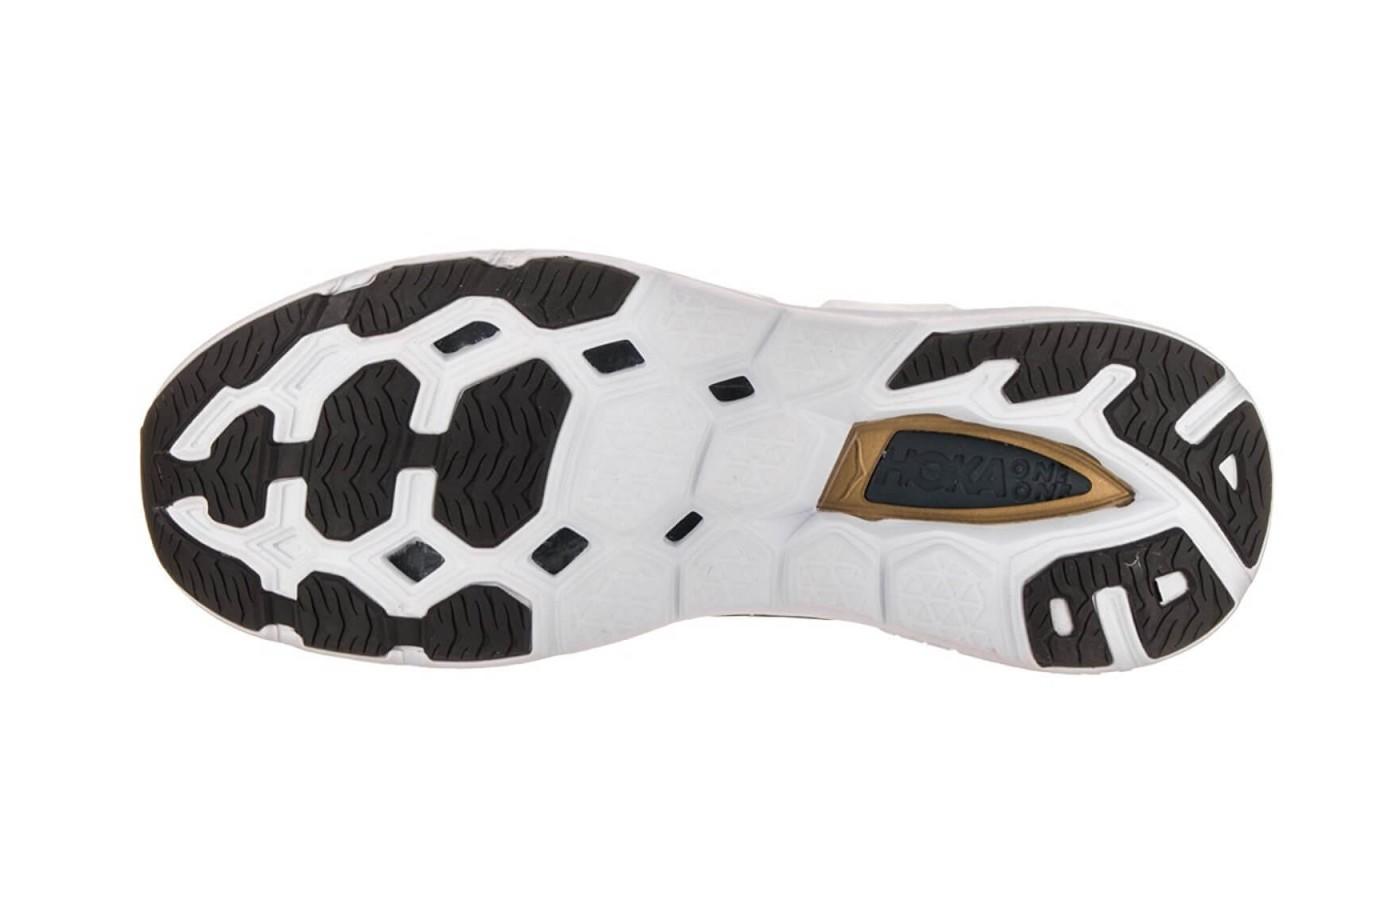 here's a look at the outsole of the vanquish 3